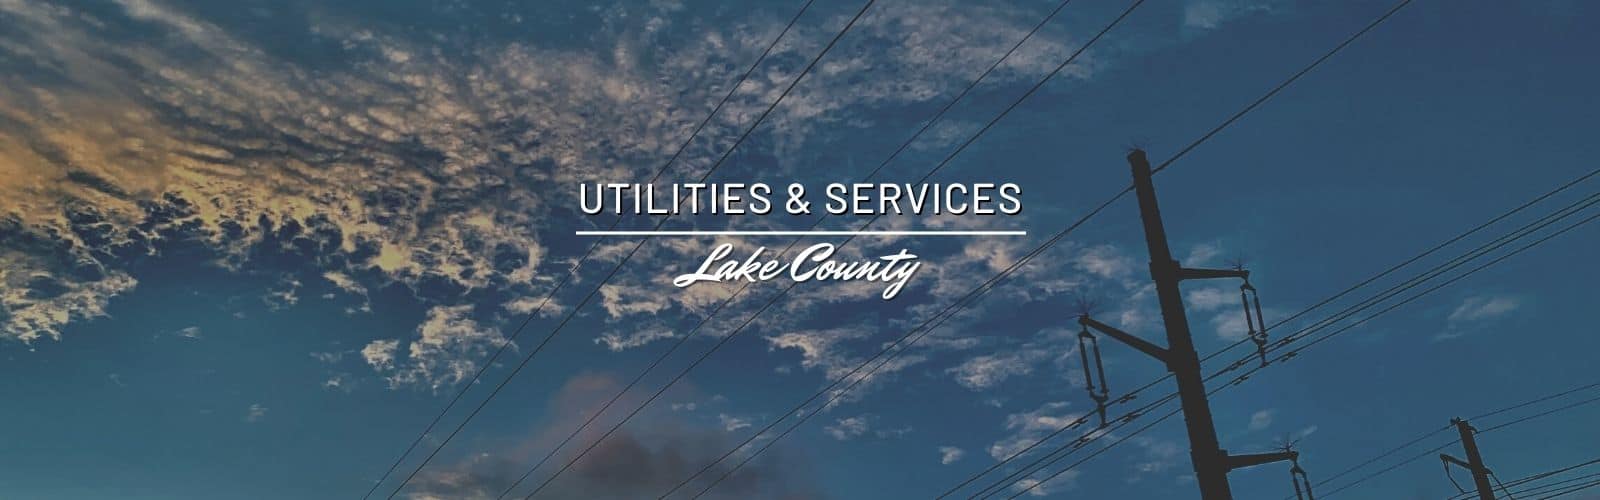 Lake County Utilities and Services